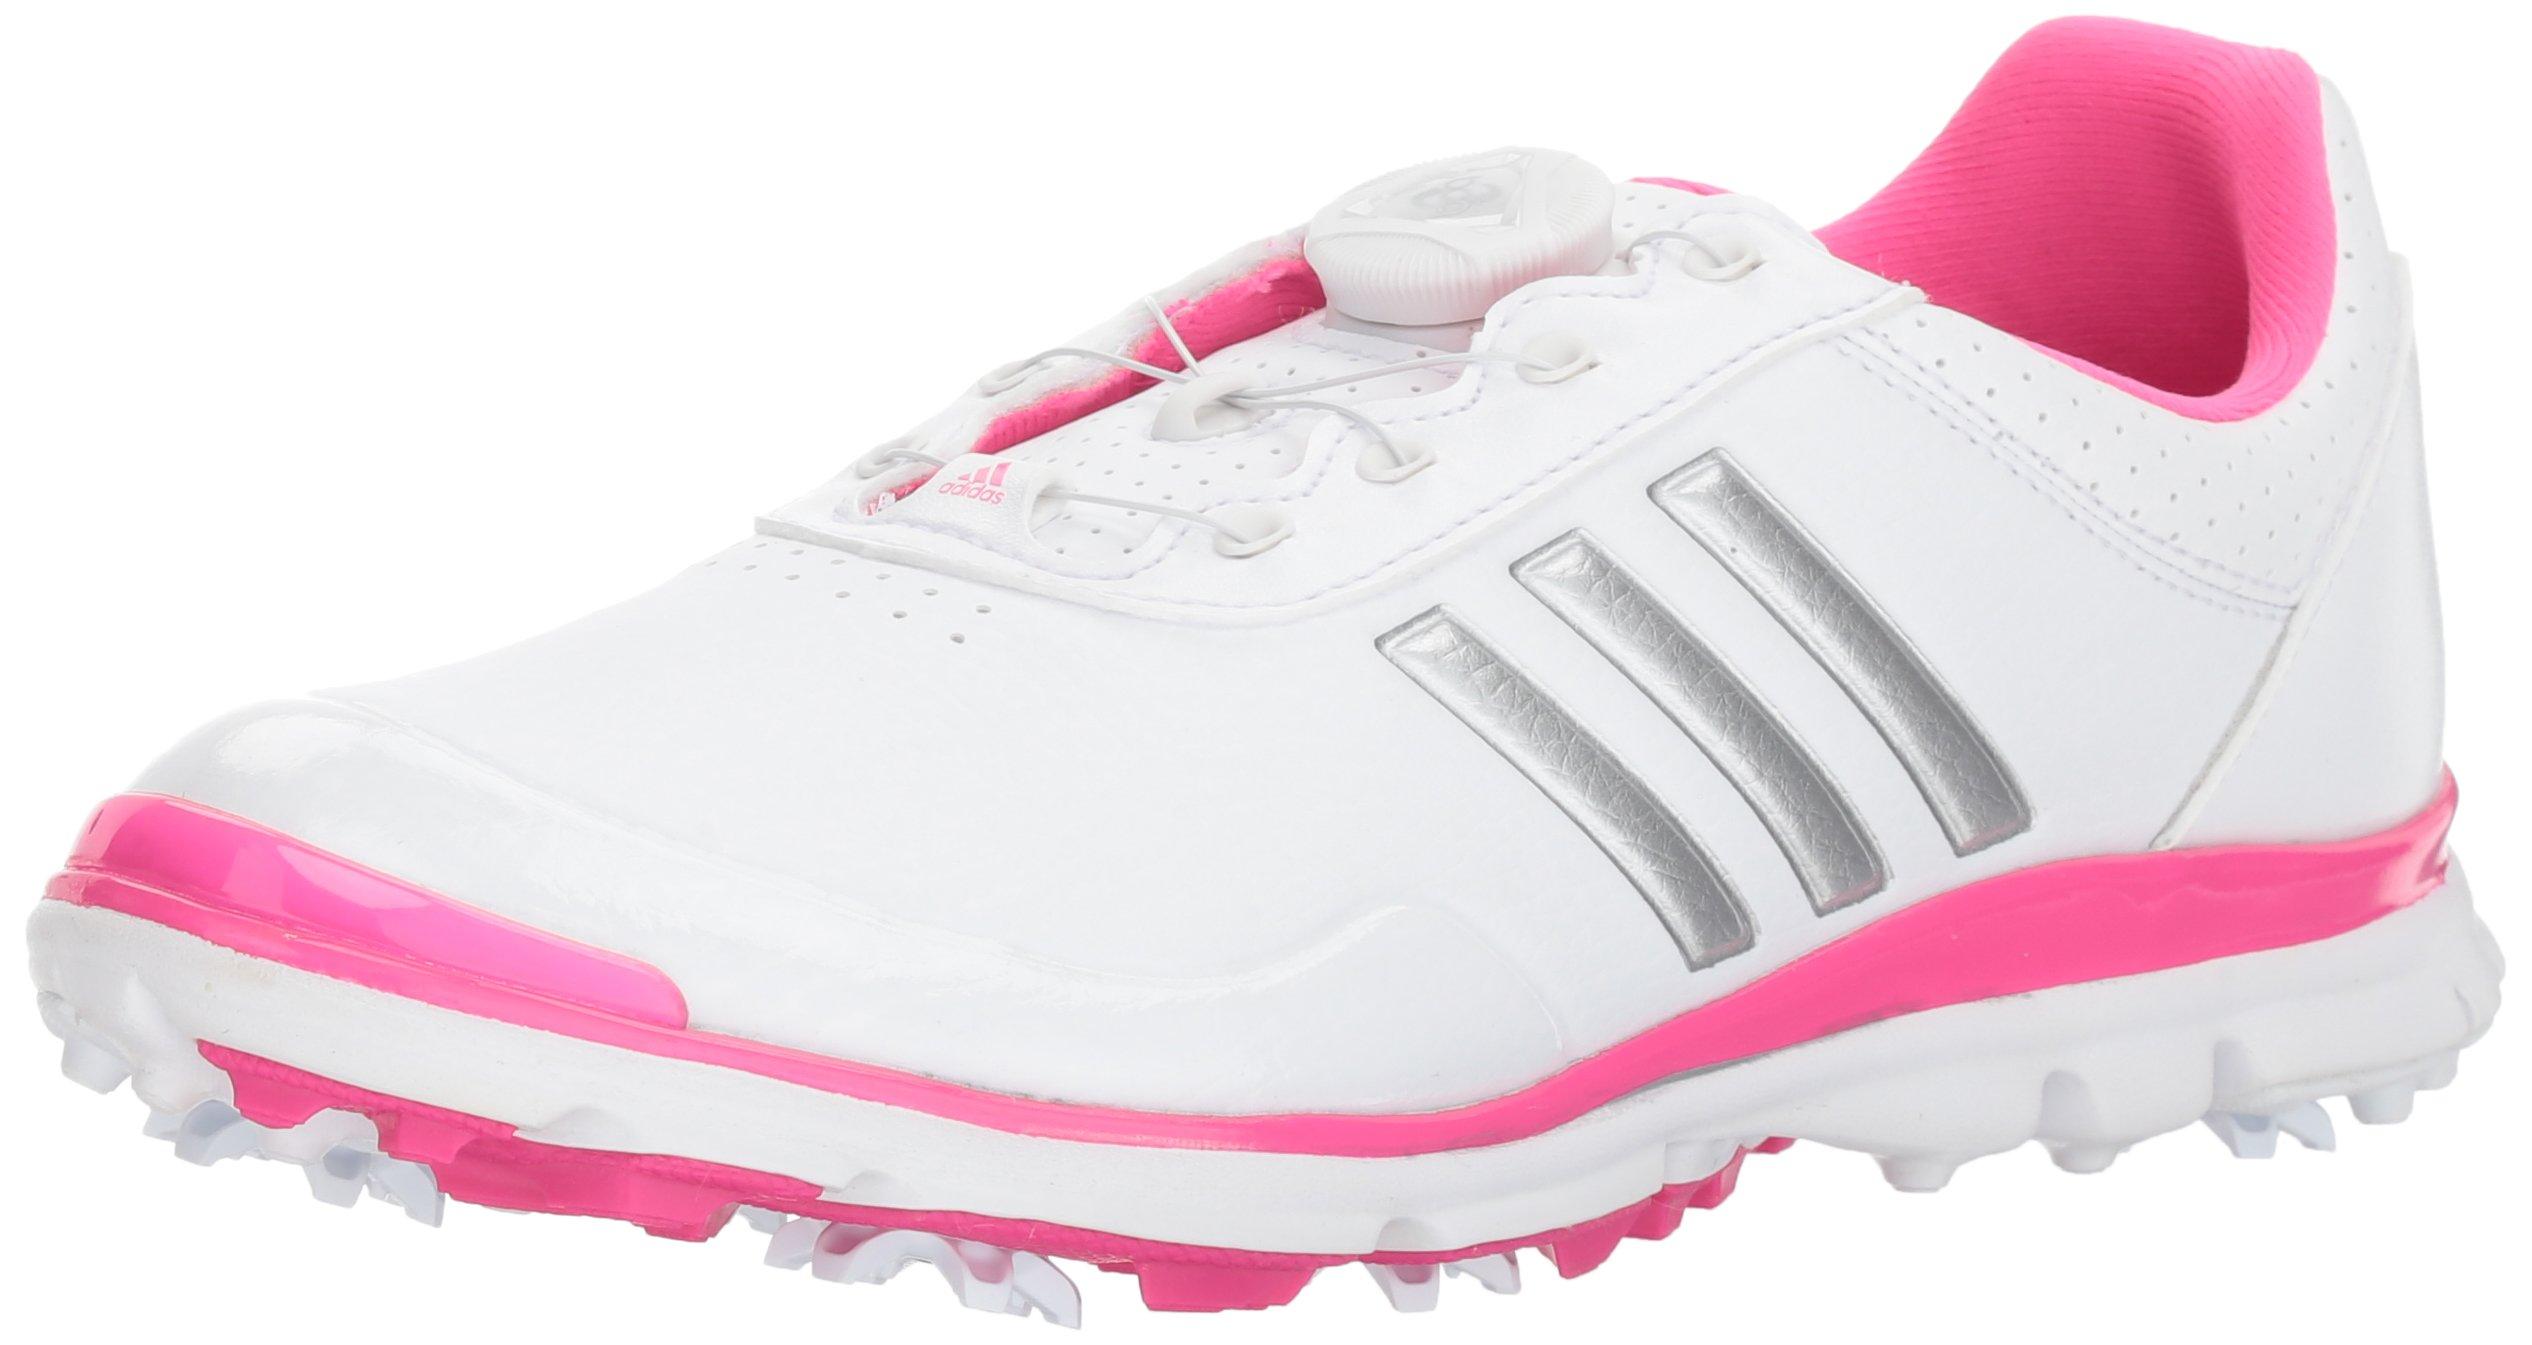 pink adidas golf shoes